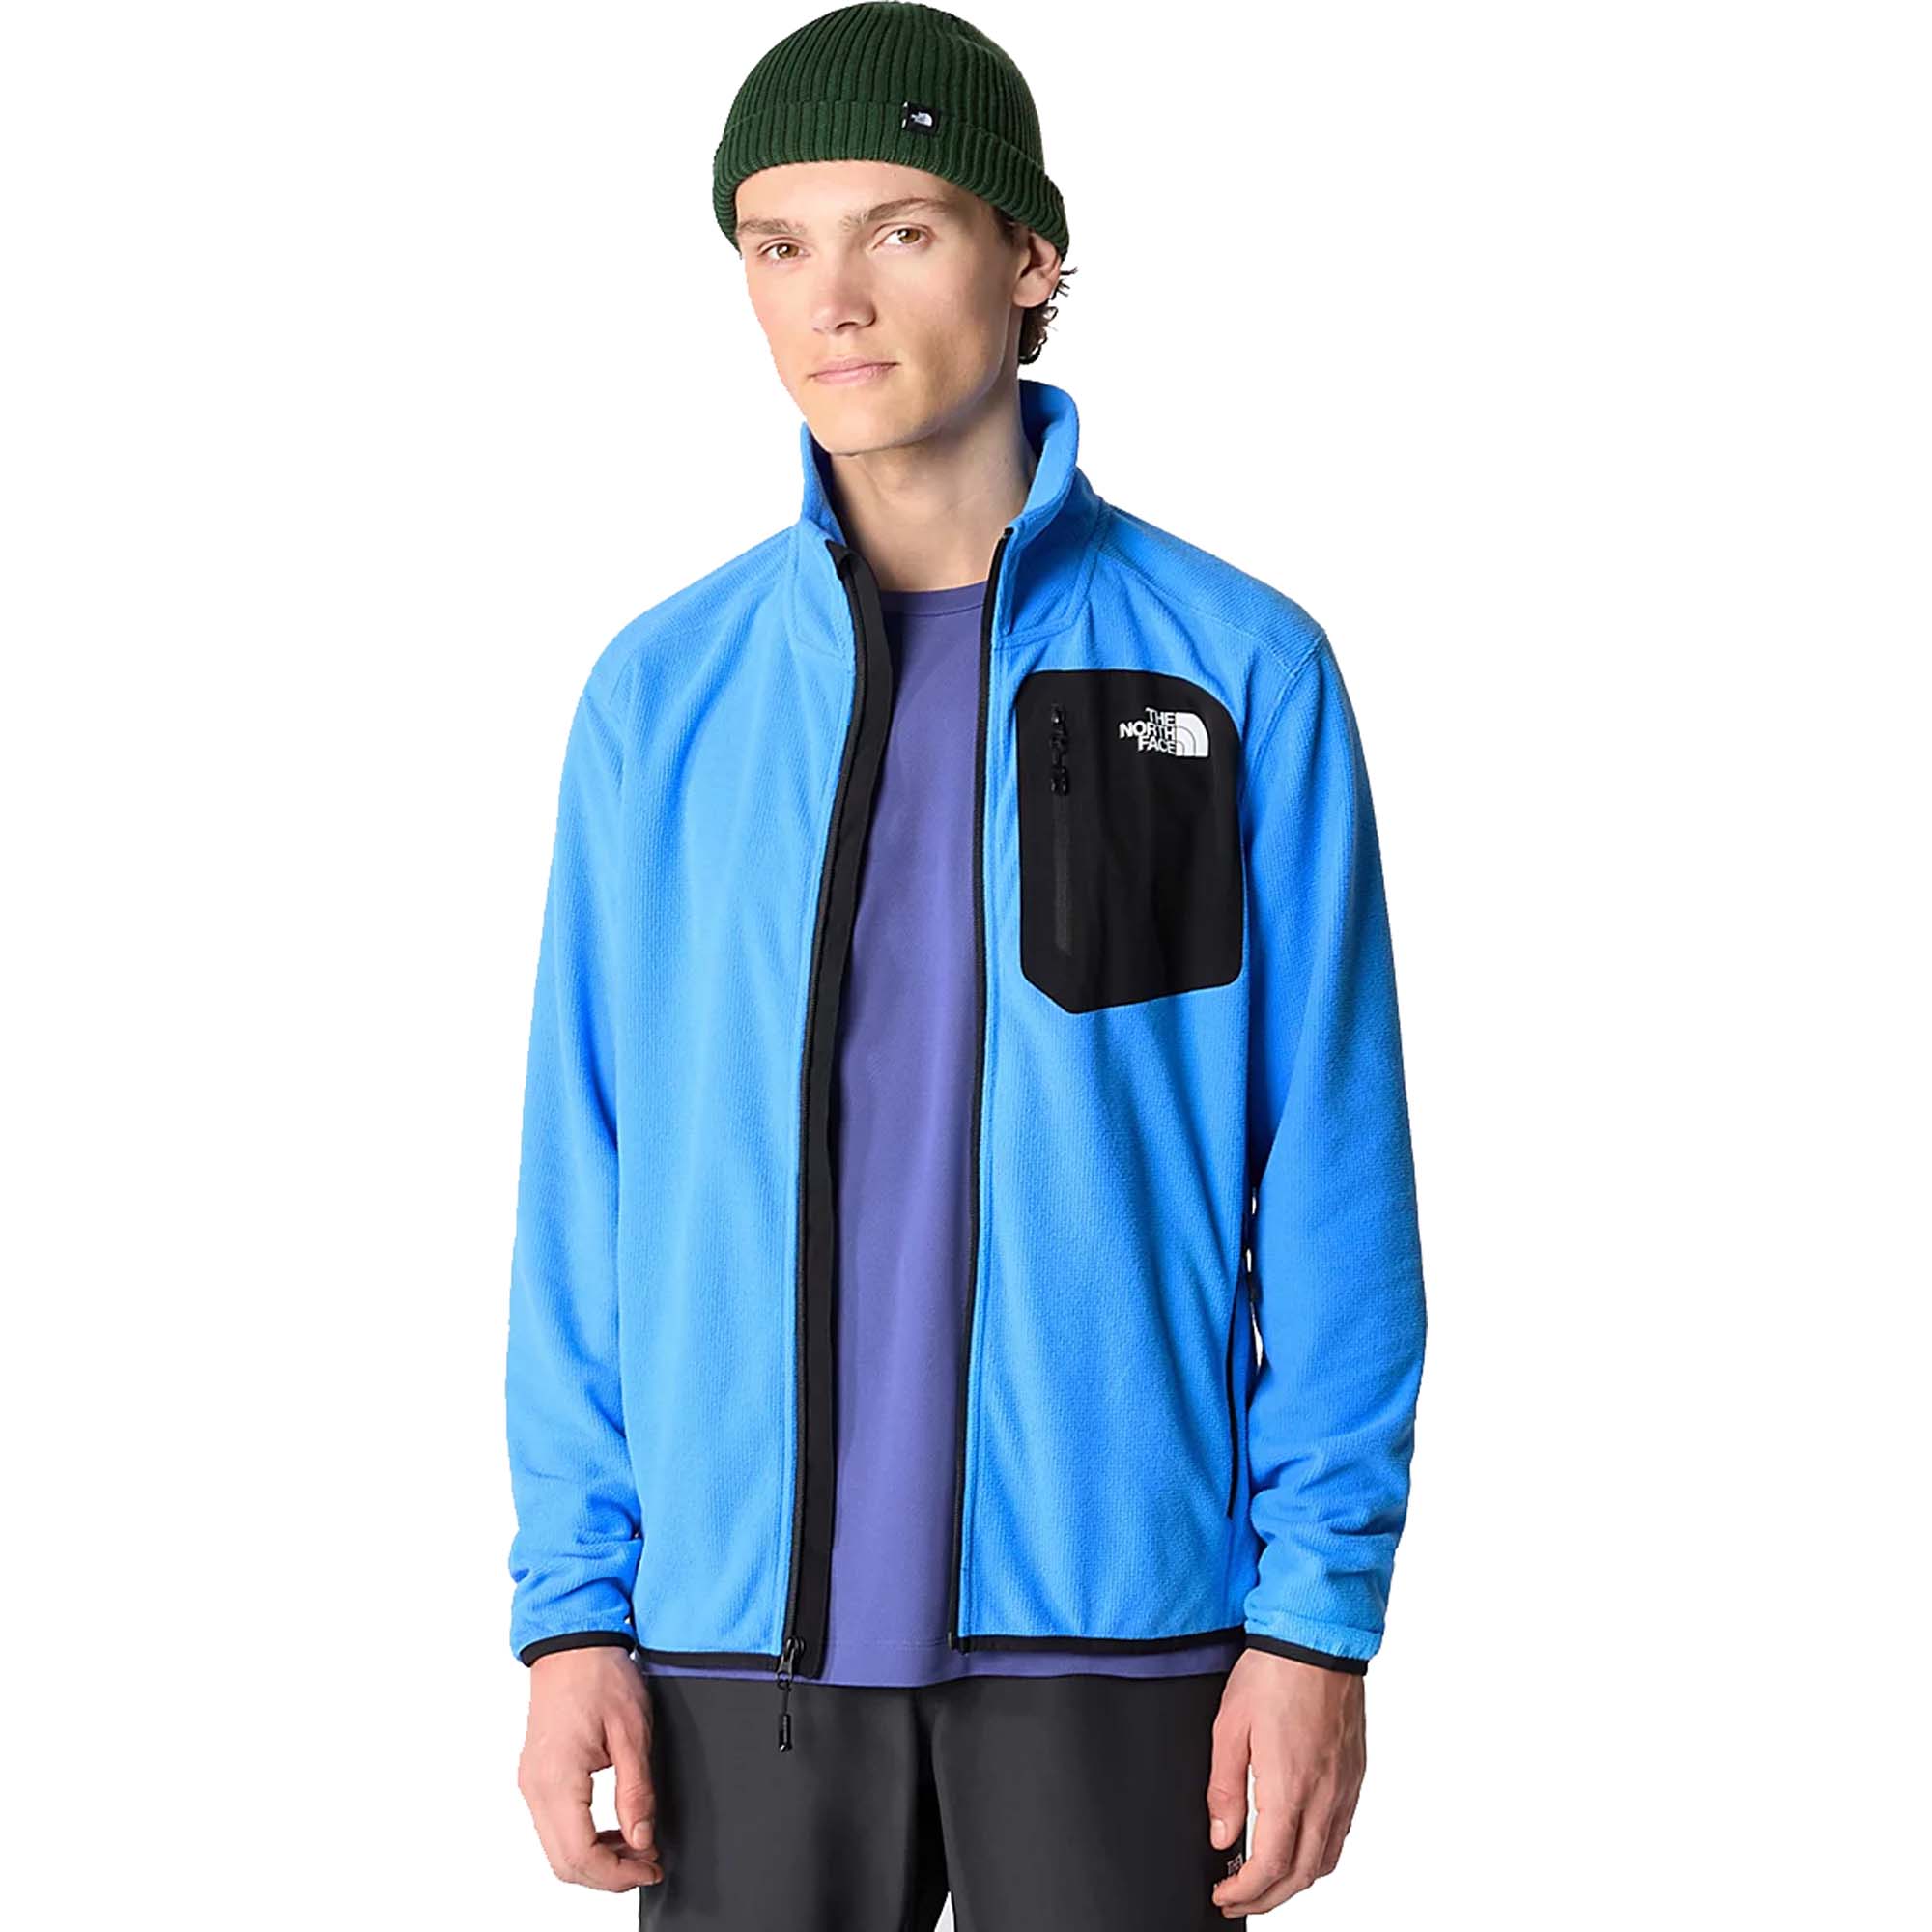 The North Face Experit Grid Fleece Jacket